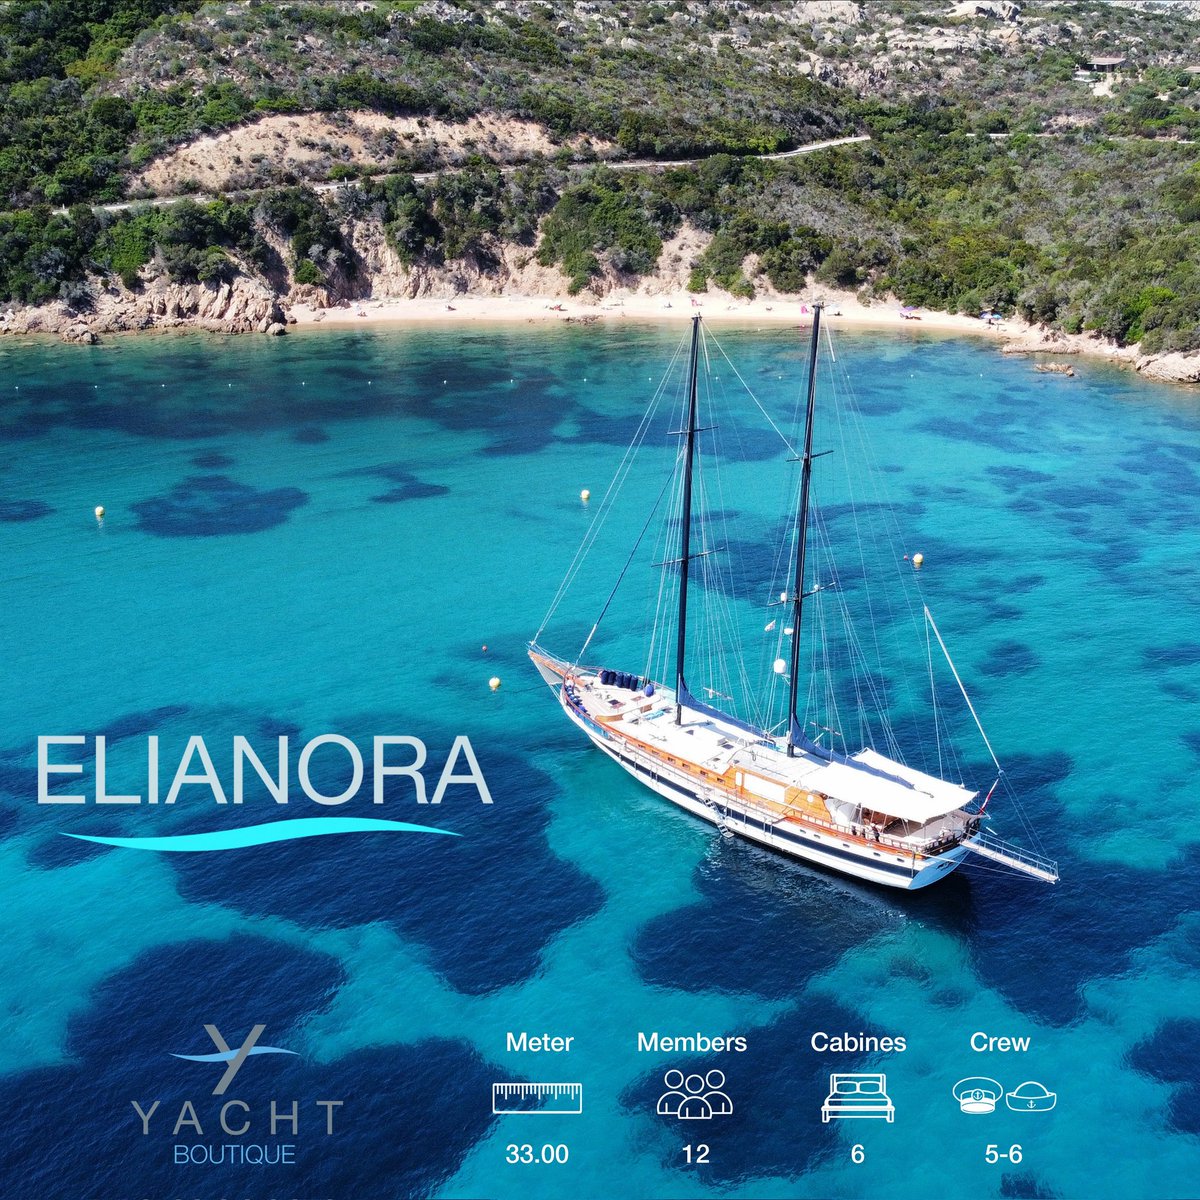 Luxury #YachtCharter Italy #YachtBoutique Gulet Schooner #Sailing #Cruises #Italy with MotorSailer Elianora & Victoria #charteryacht #Yacht #yachtholiday #boatrental #luxurytravel #trending  #TravelGoals #family #holiday #sailing #yachting #vacation #france #gulet #charter #boats